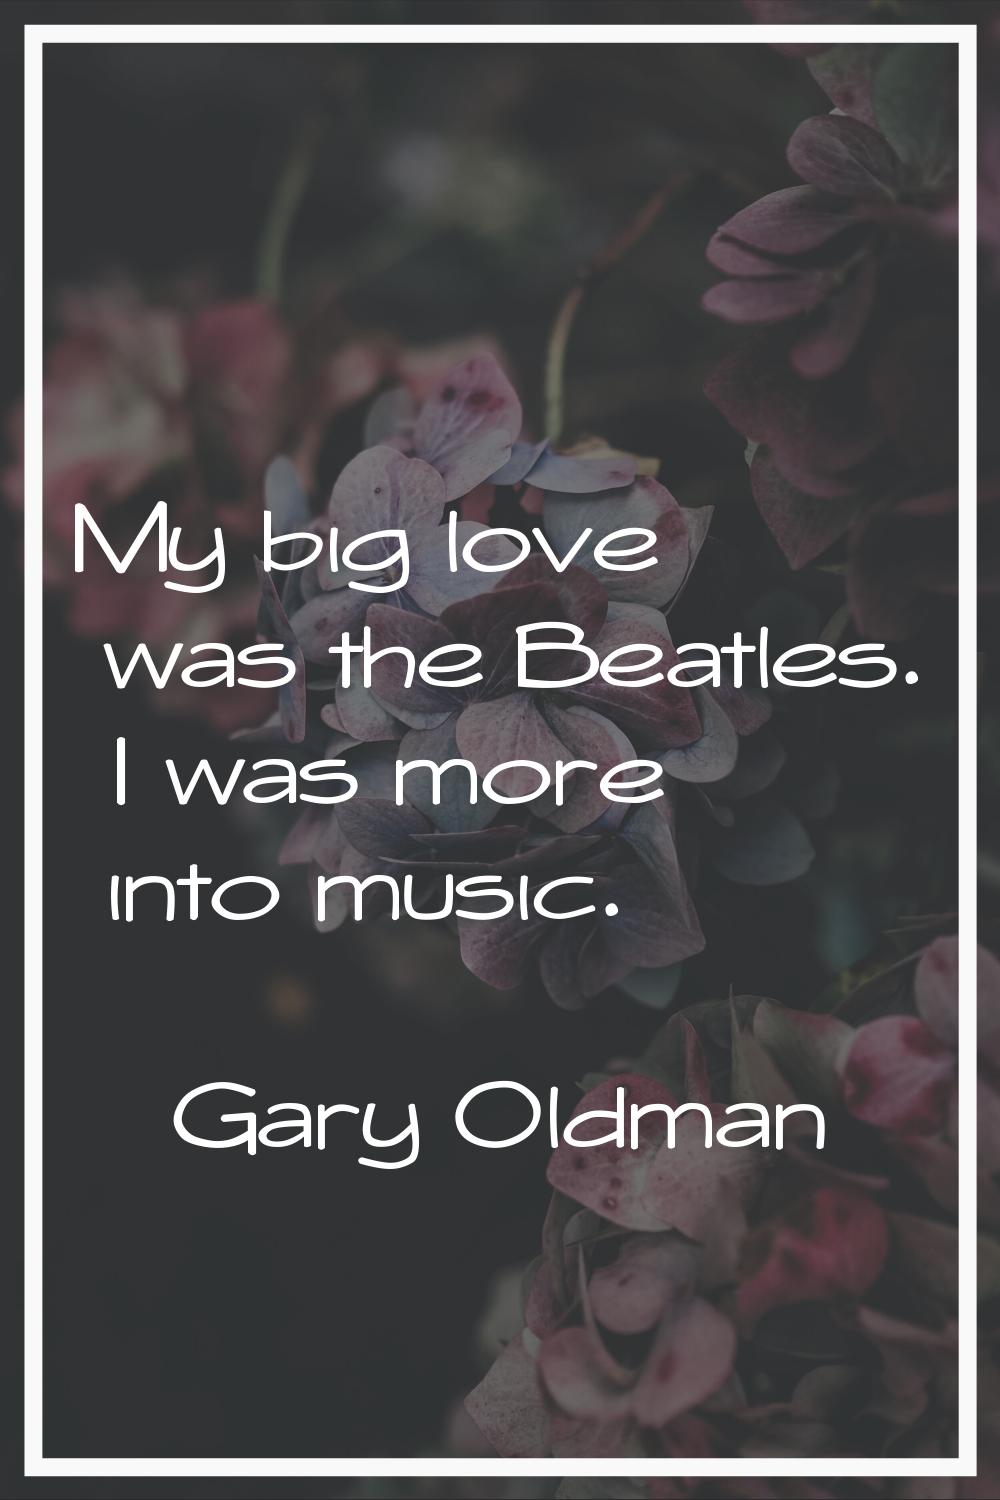 My big love was the Beatles. I was more into music.